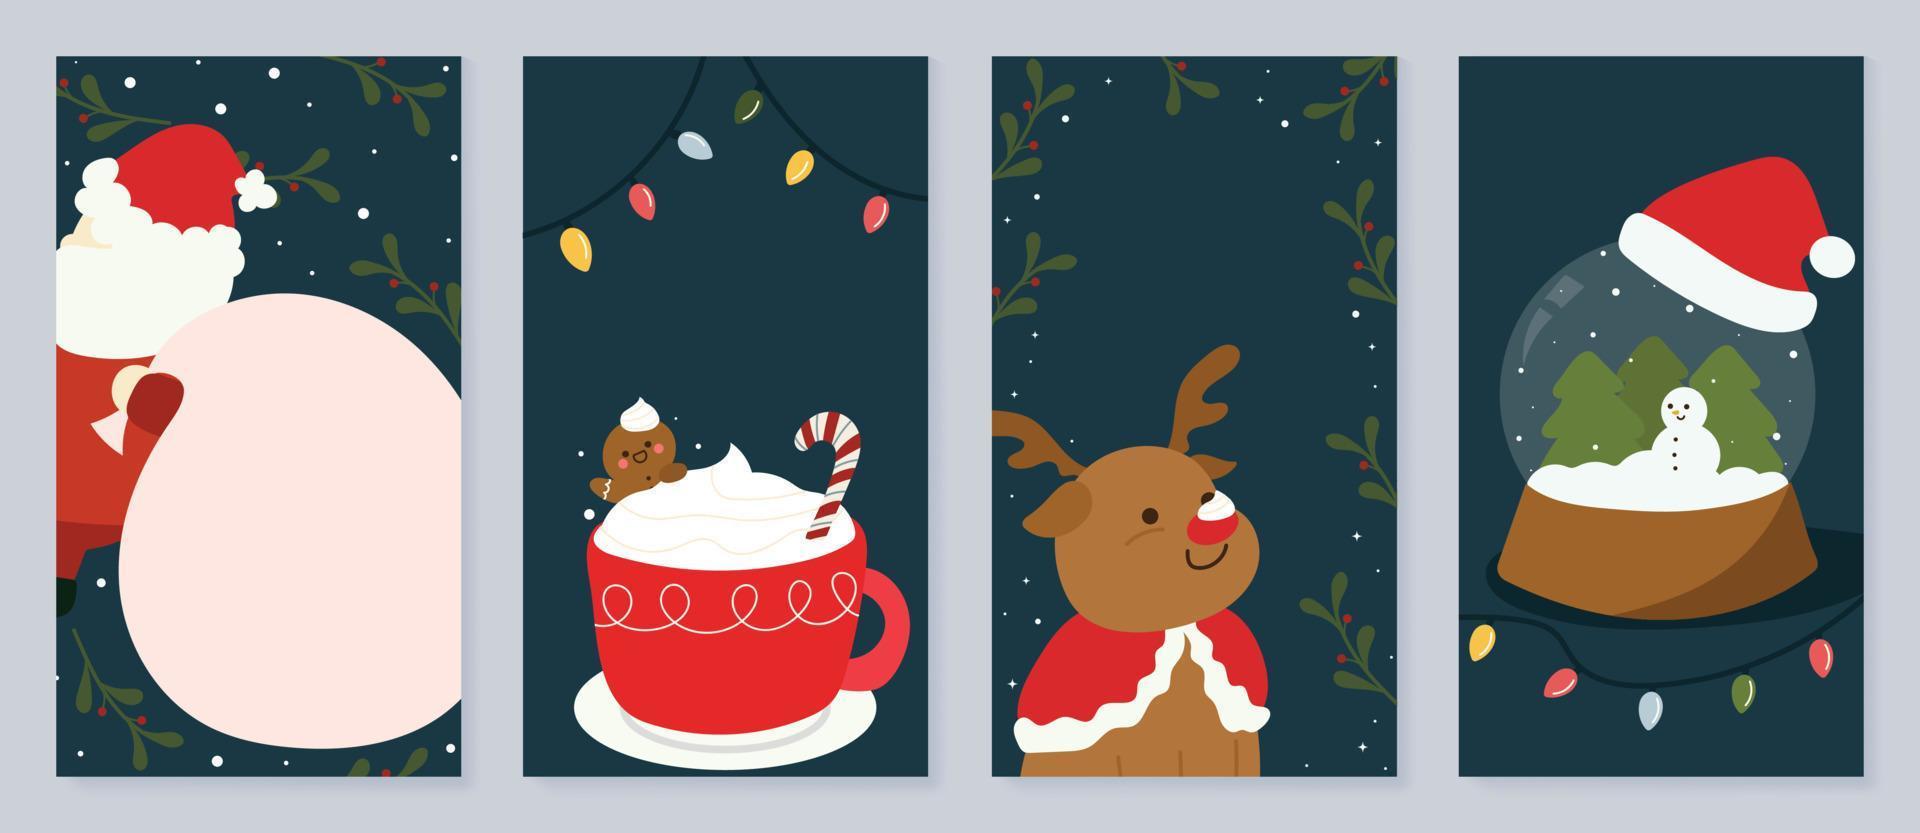 Set of christmas template poster. Christmas decorative element of santa, whipped cream cup, reindeer, snow crystal ball. Design illustration for banner, card, social media, advertising, website. vector